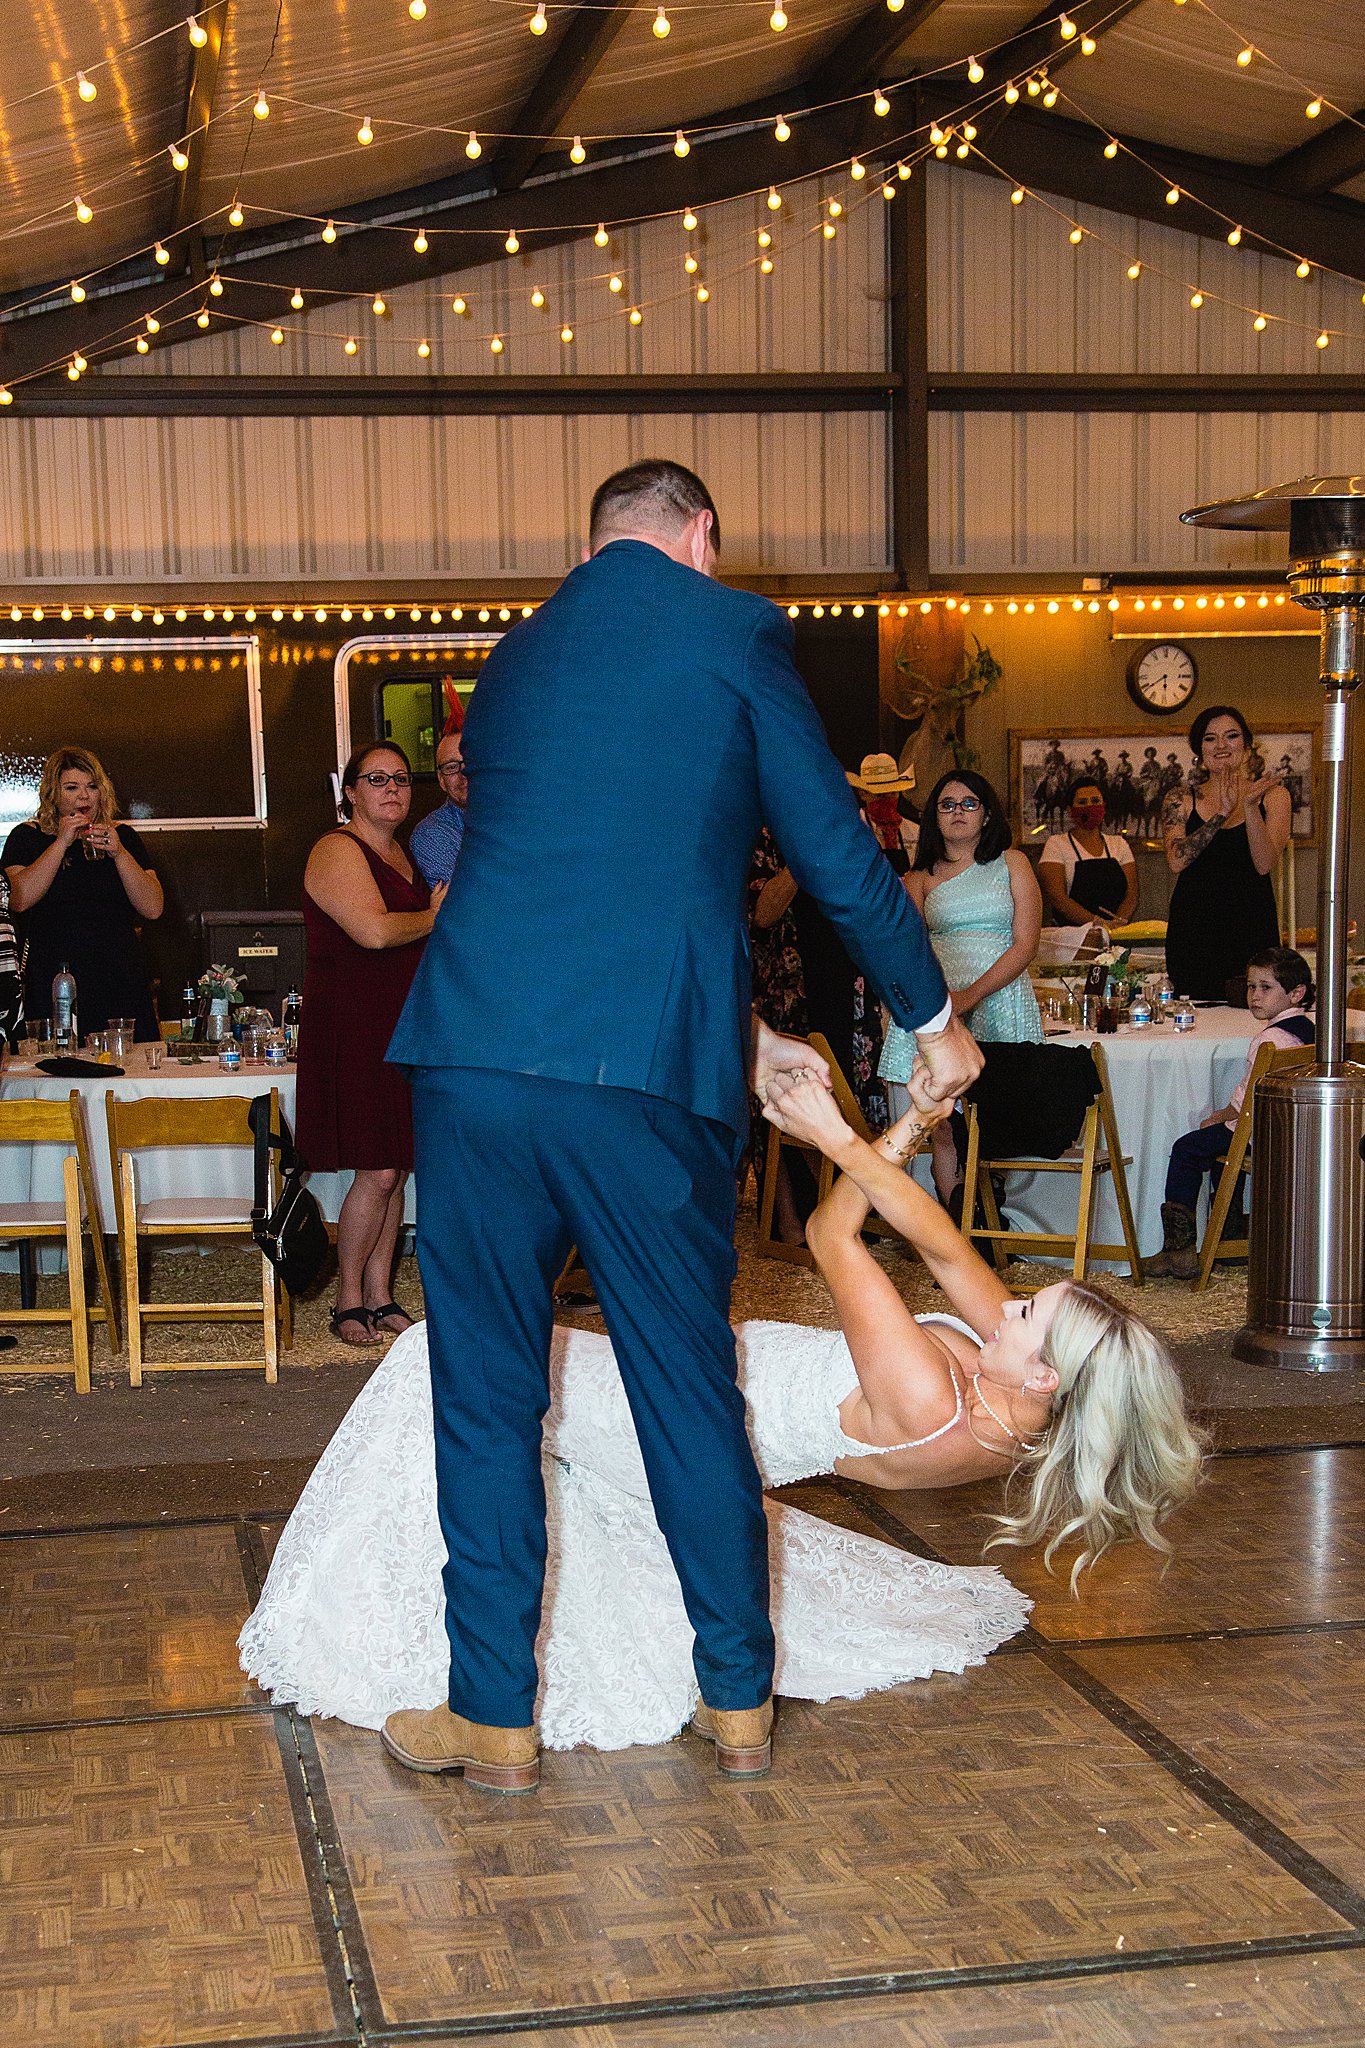 Bride and Groom sharing first dance at their Van Dickson Ranch wedding reception by Arizona wedding photographer PMA Photography.